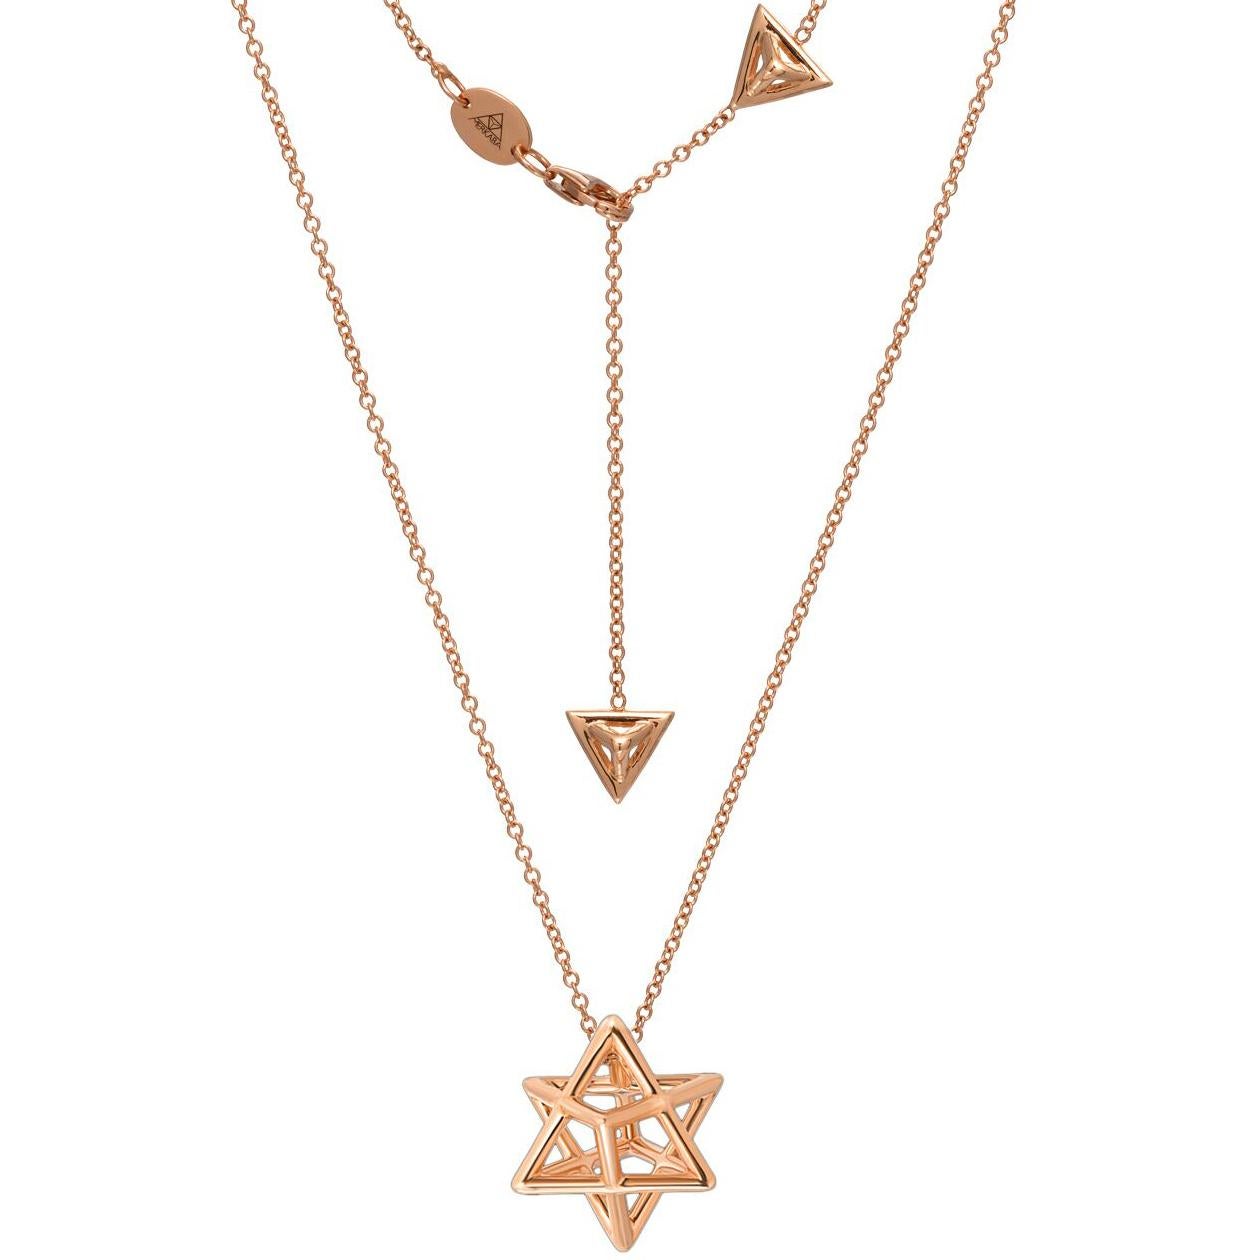 Merkaba 18K rose gold, three dimensional star tetrahedron pendant necklace, is a heirloom-quality, sacred geometric unisex jewelry piece, highlighting superb attention to detail and extraordinary polish, symmetry and equilibrium. It suspends